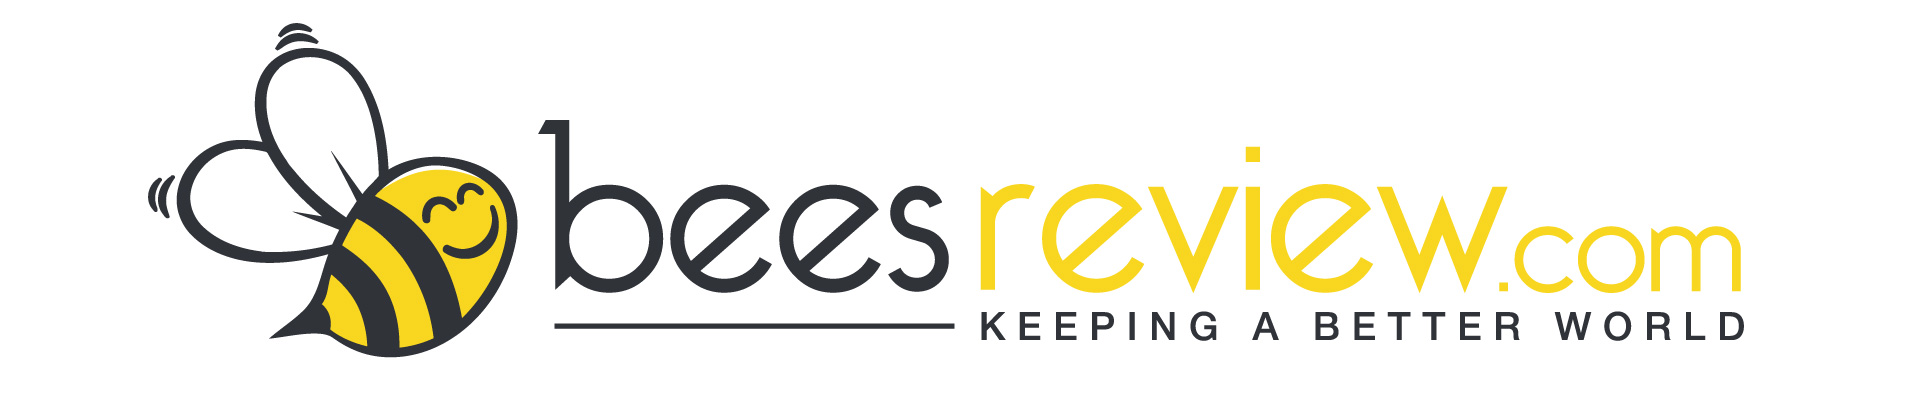 bees review banner